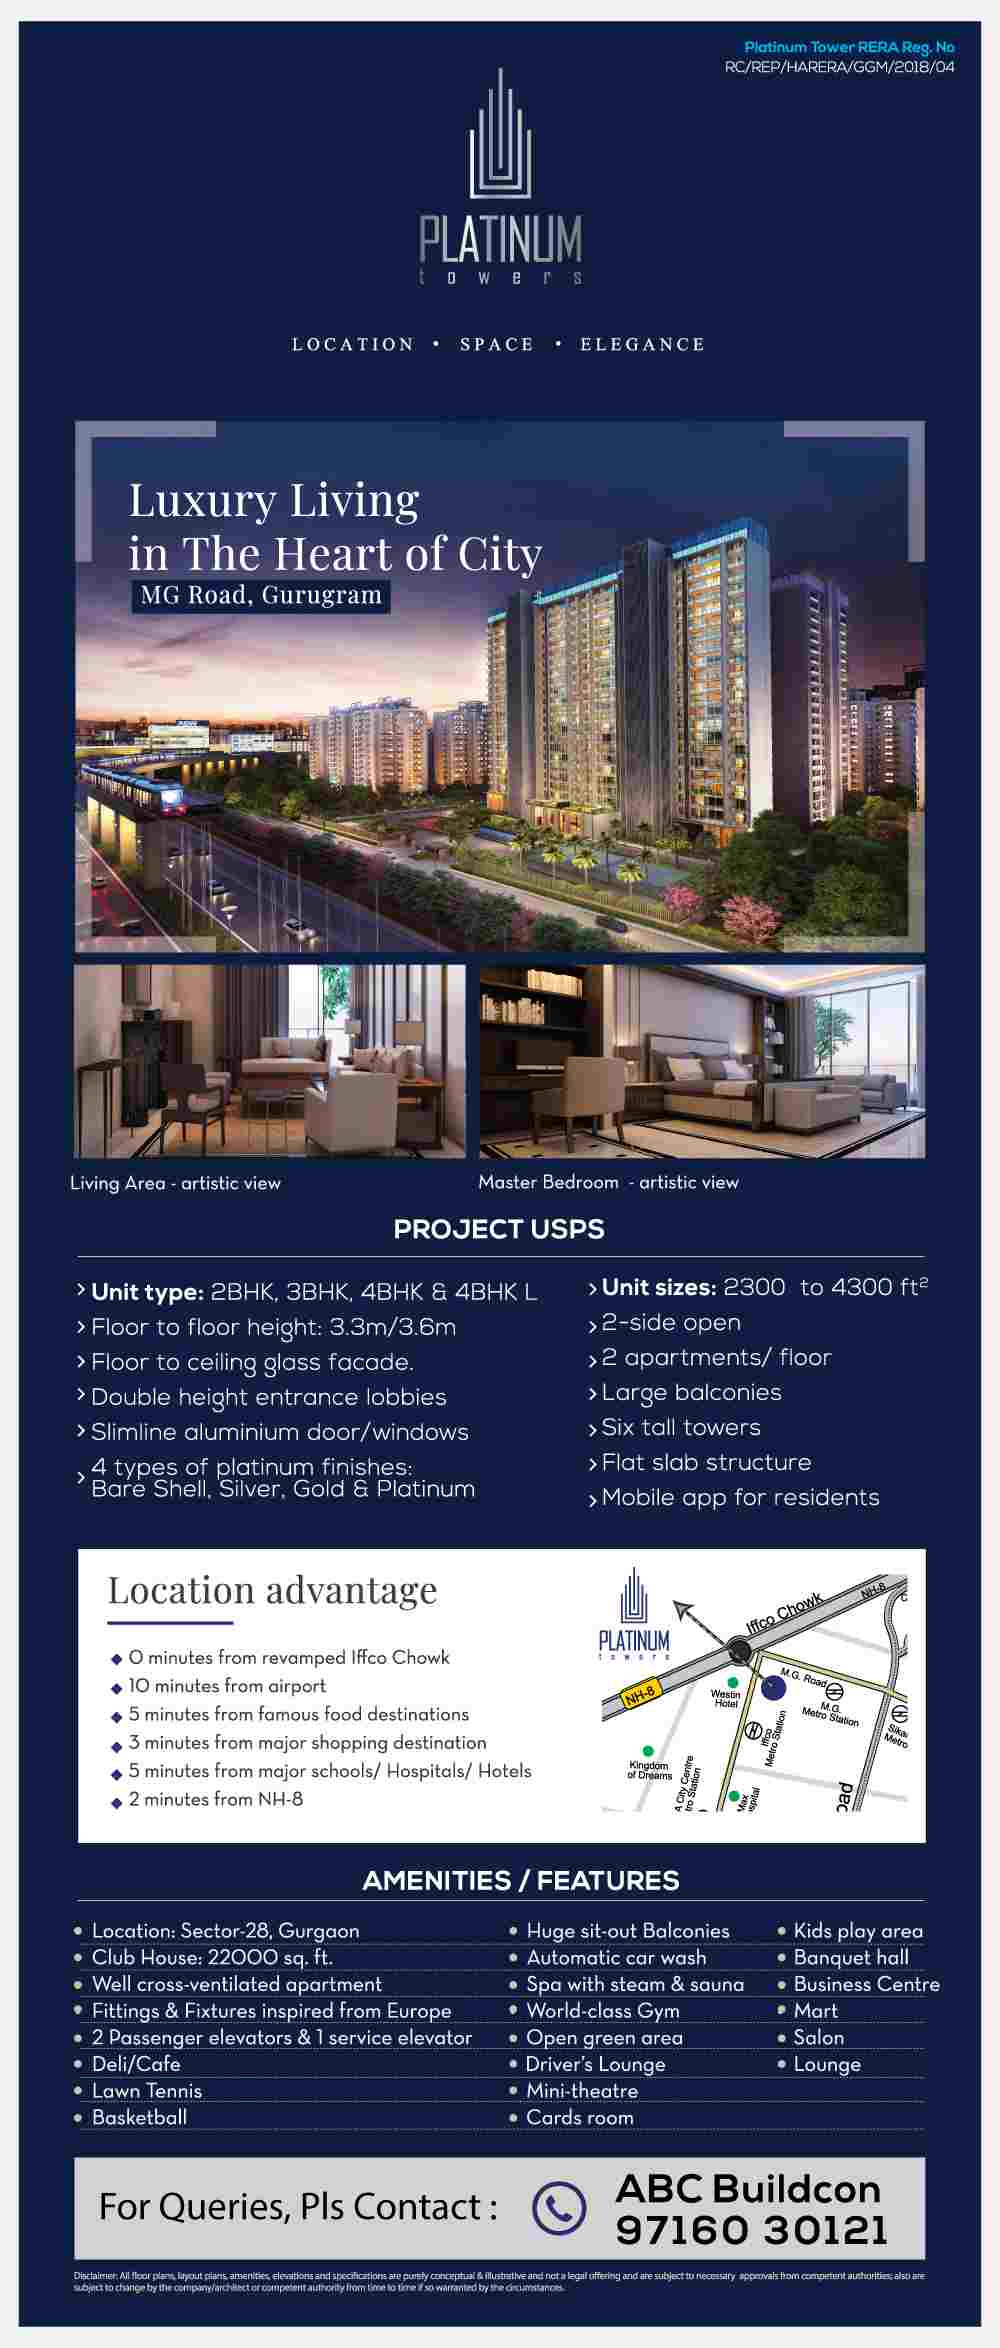 Enjoy luxury living in the heart of the city at Suncity Platinum Towers in Gurgaon